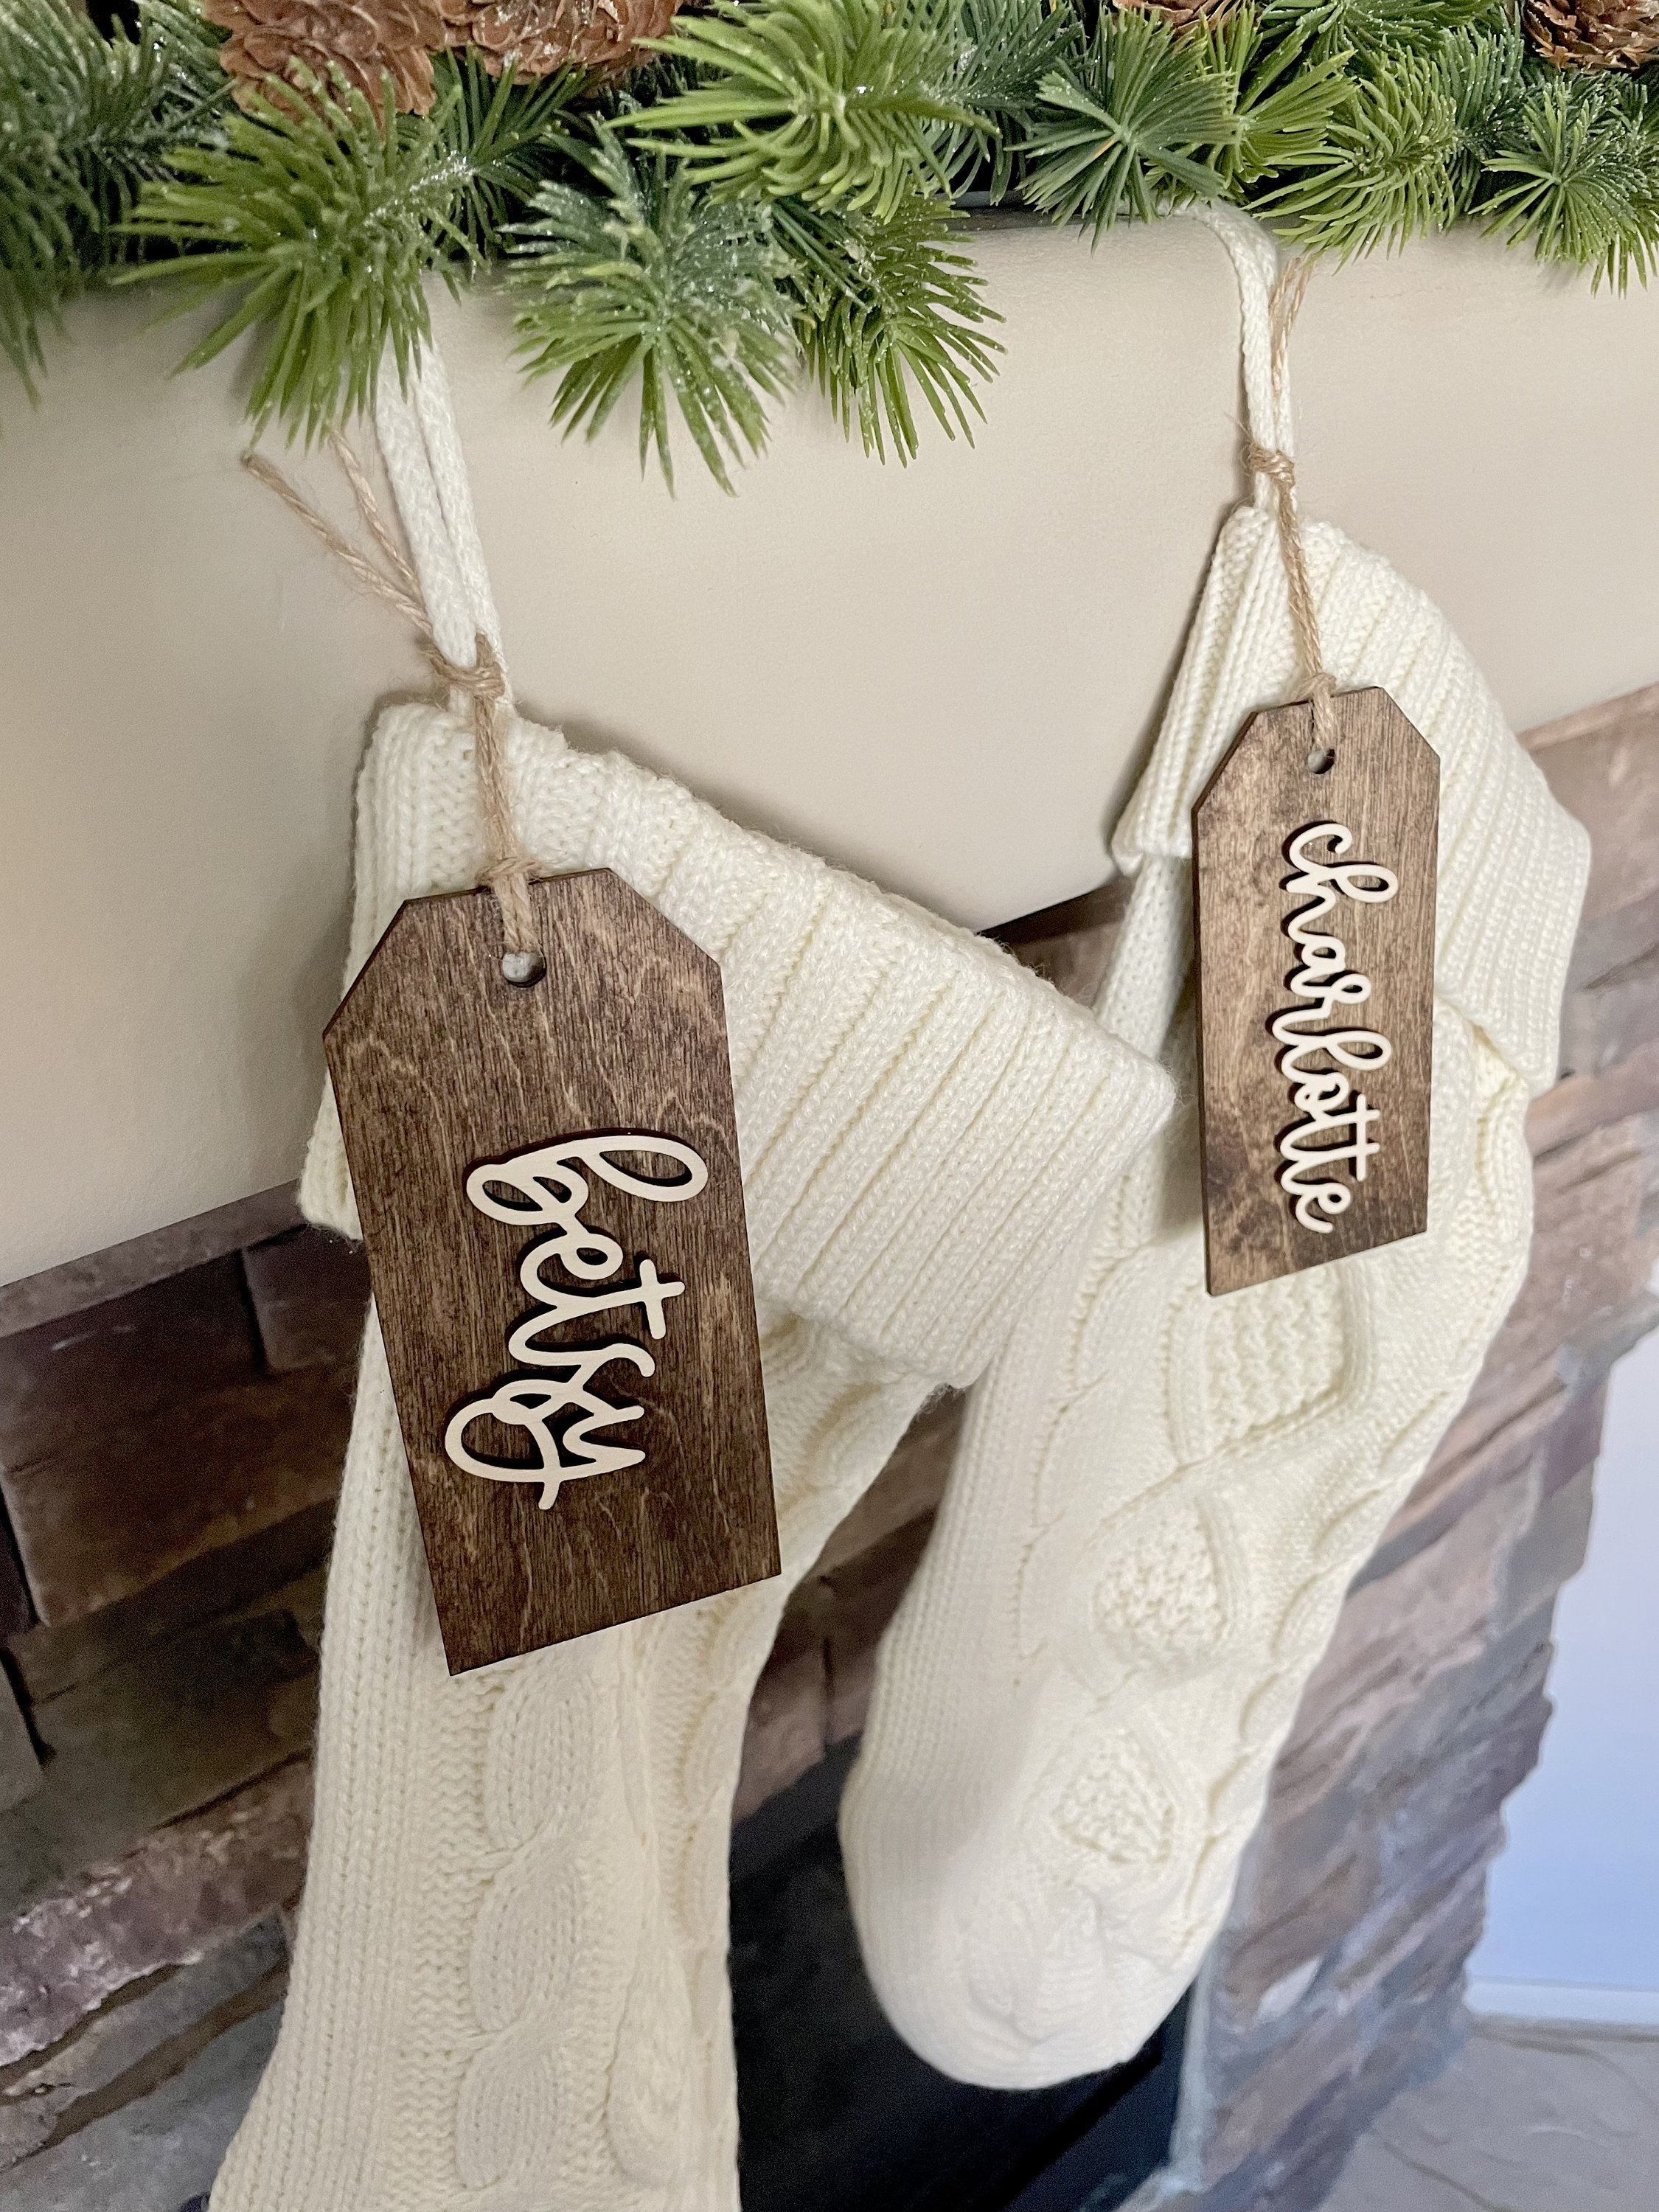 Personalized Stocking Tags – MaSe deSigns